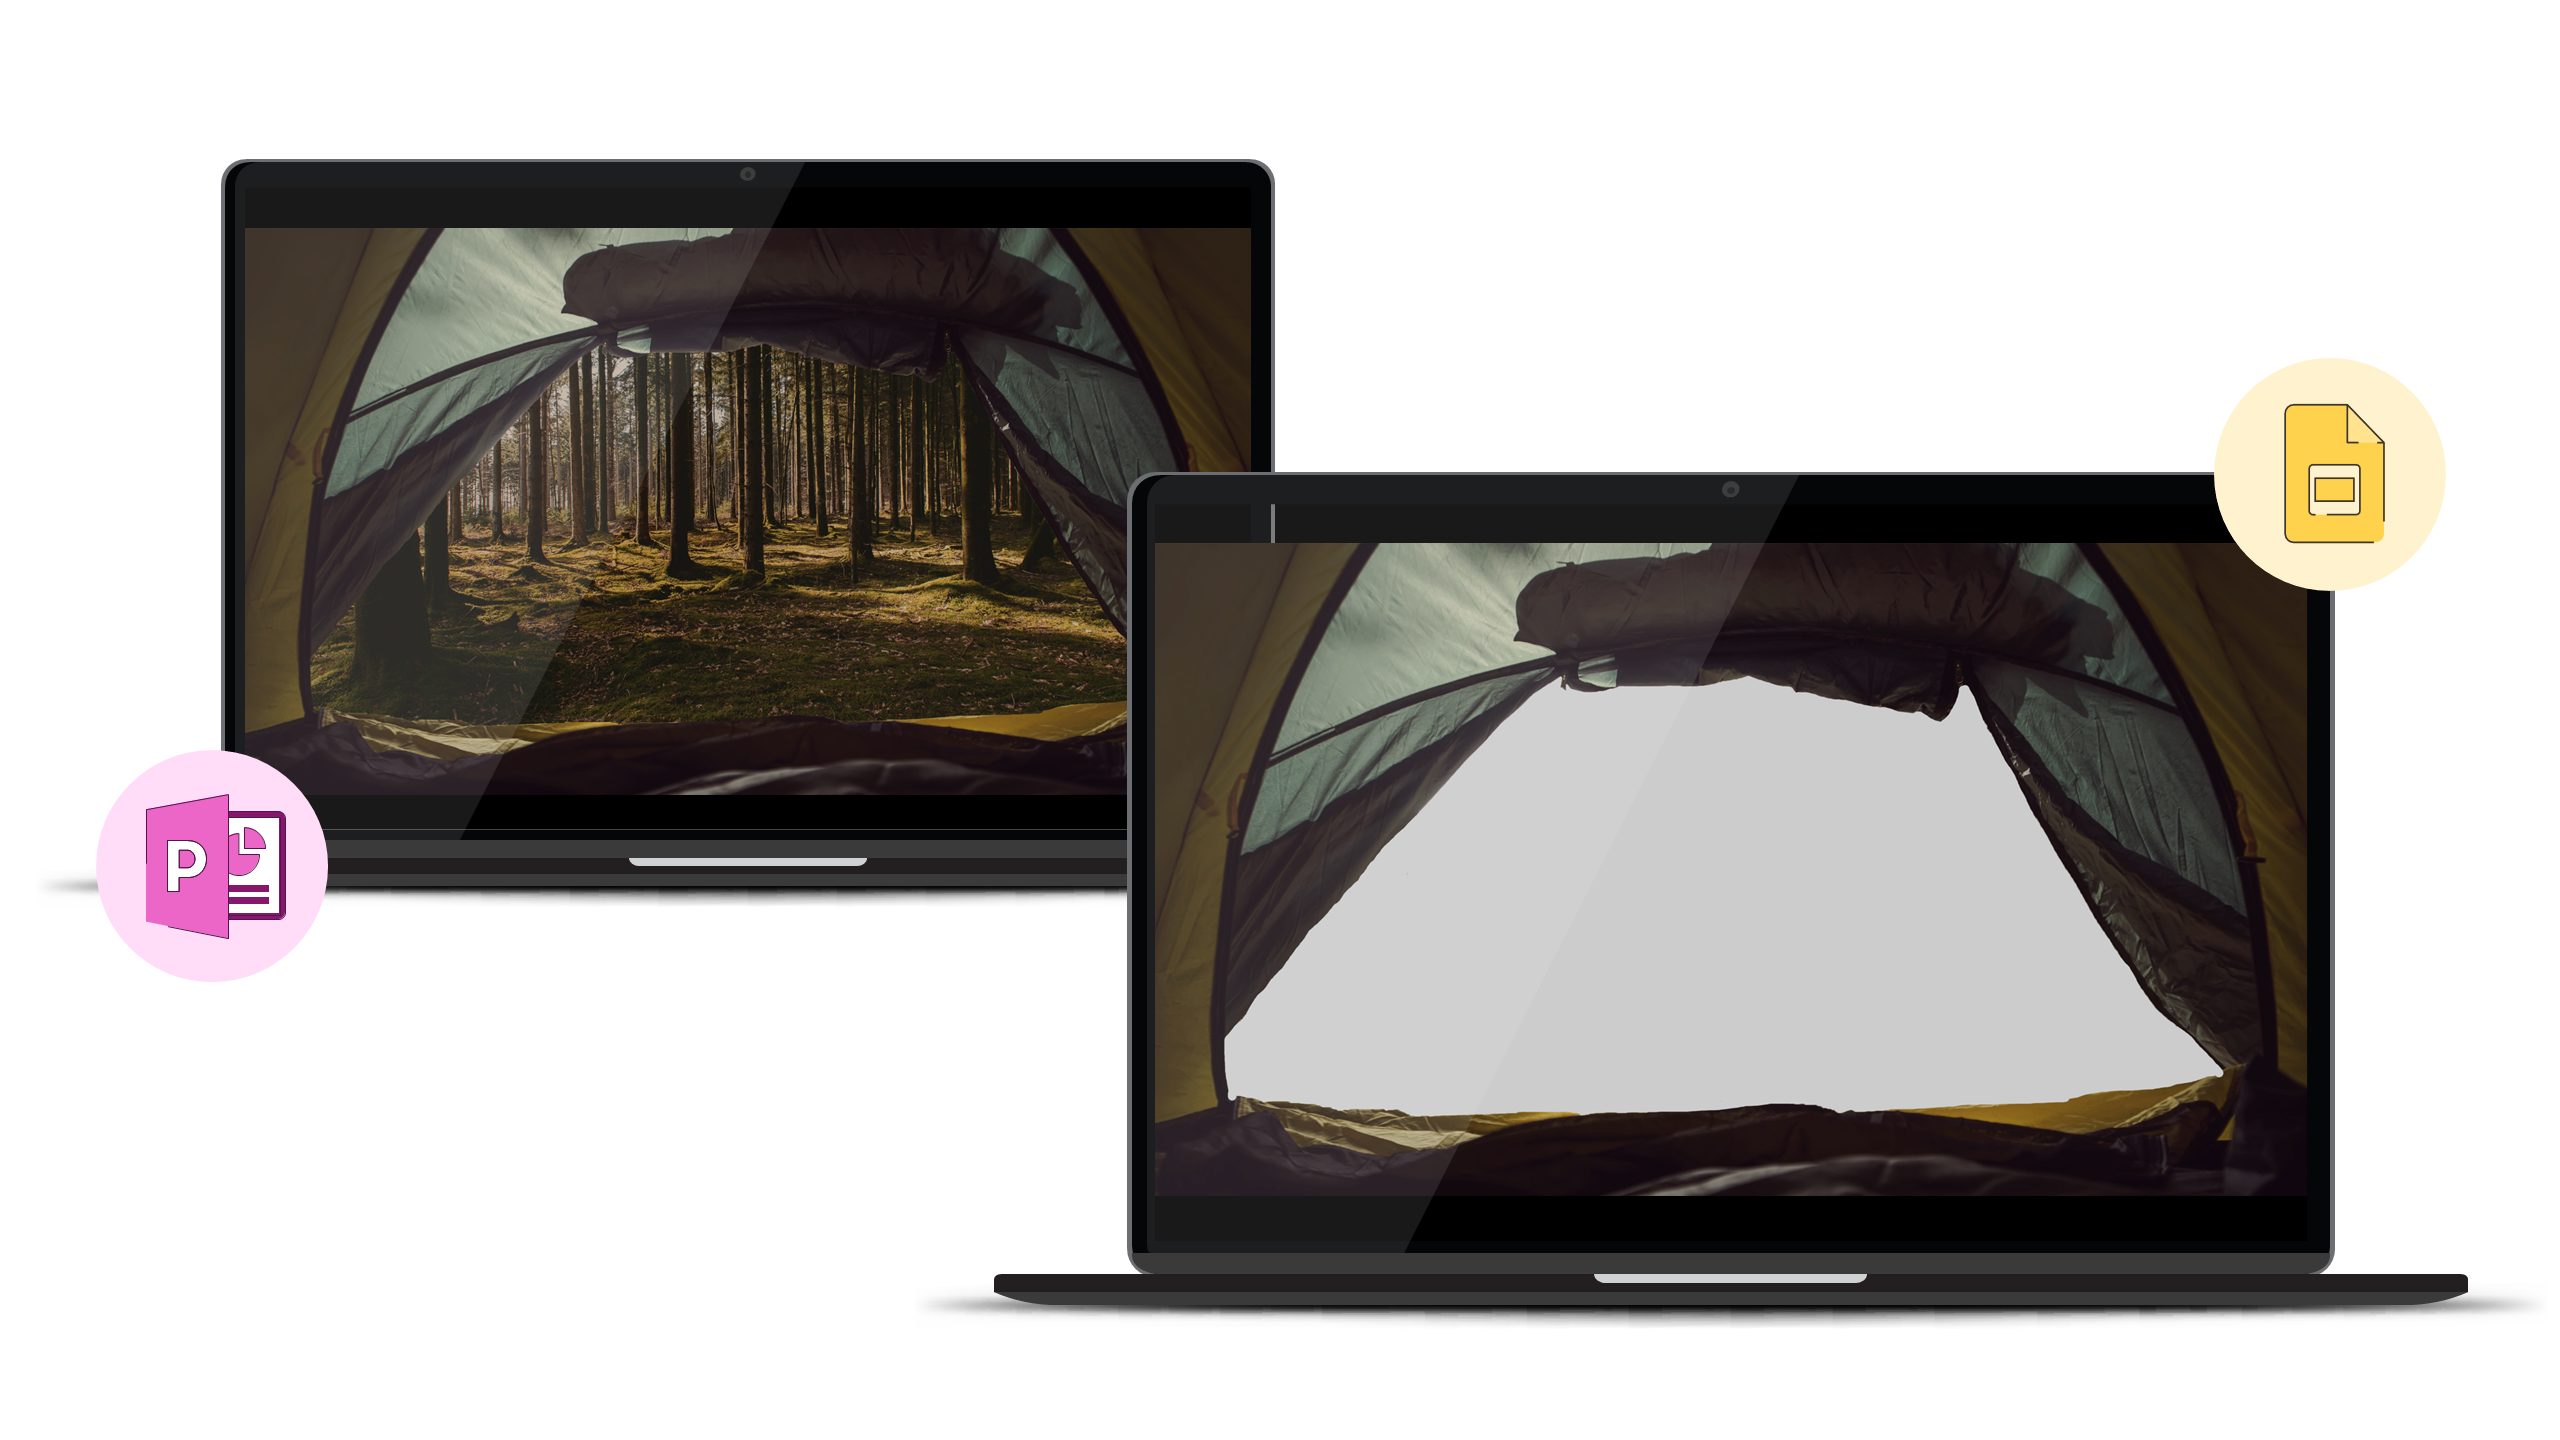 2 screenshots. The first shows a slide in PowerPoint with a composite image on. There is an image of a tent taken from the inside, the entrance has been cropped out and an image of a beautiful forest added in the gap. In the second screenshot, we can just see the image of the tent, with a blank space where the forest image should be.